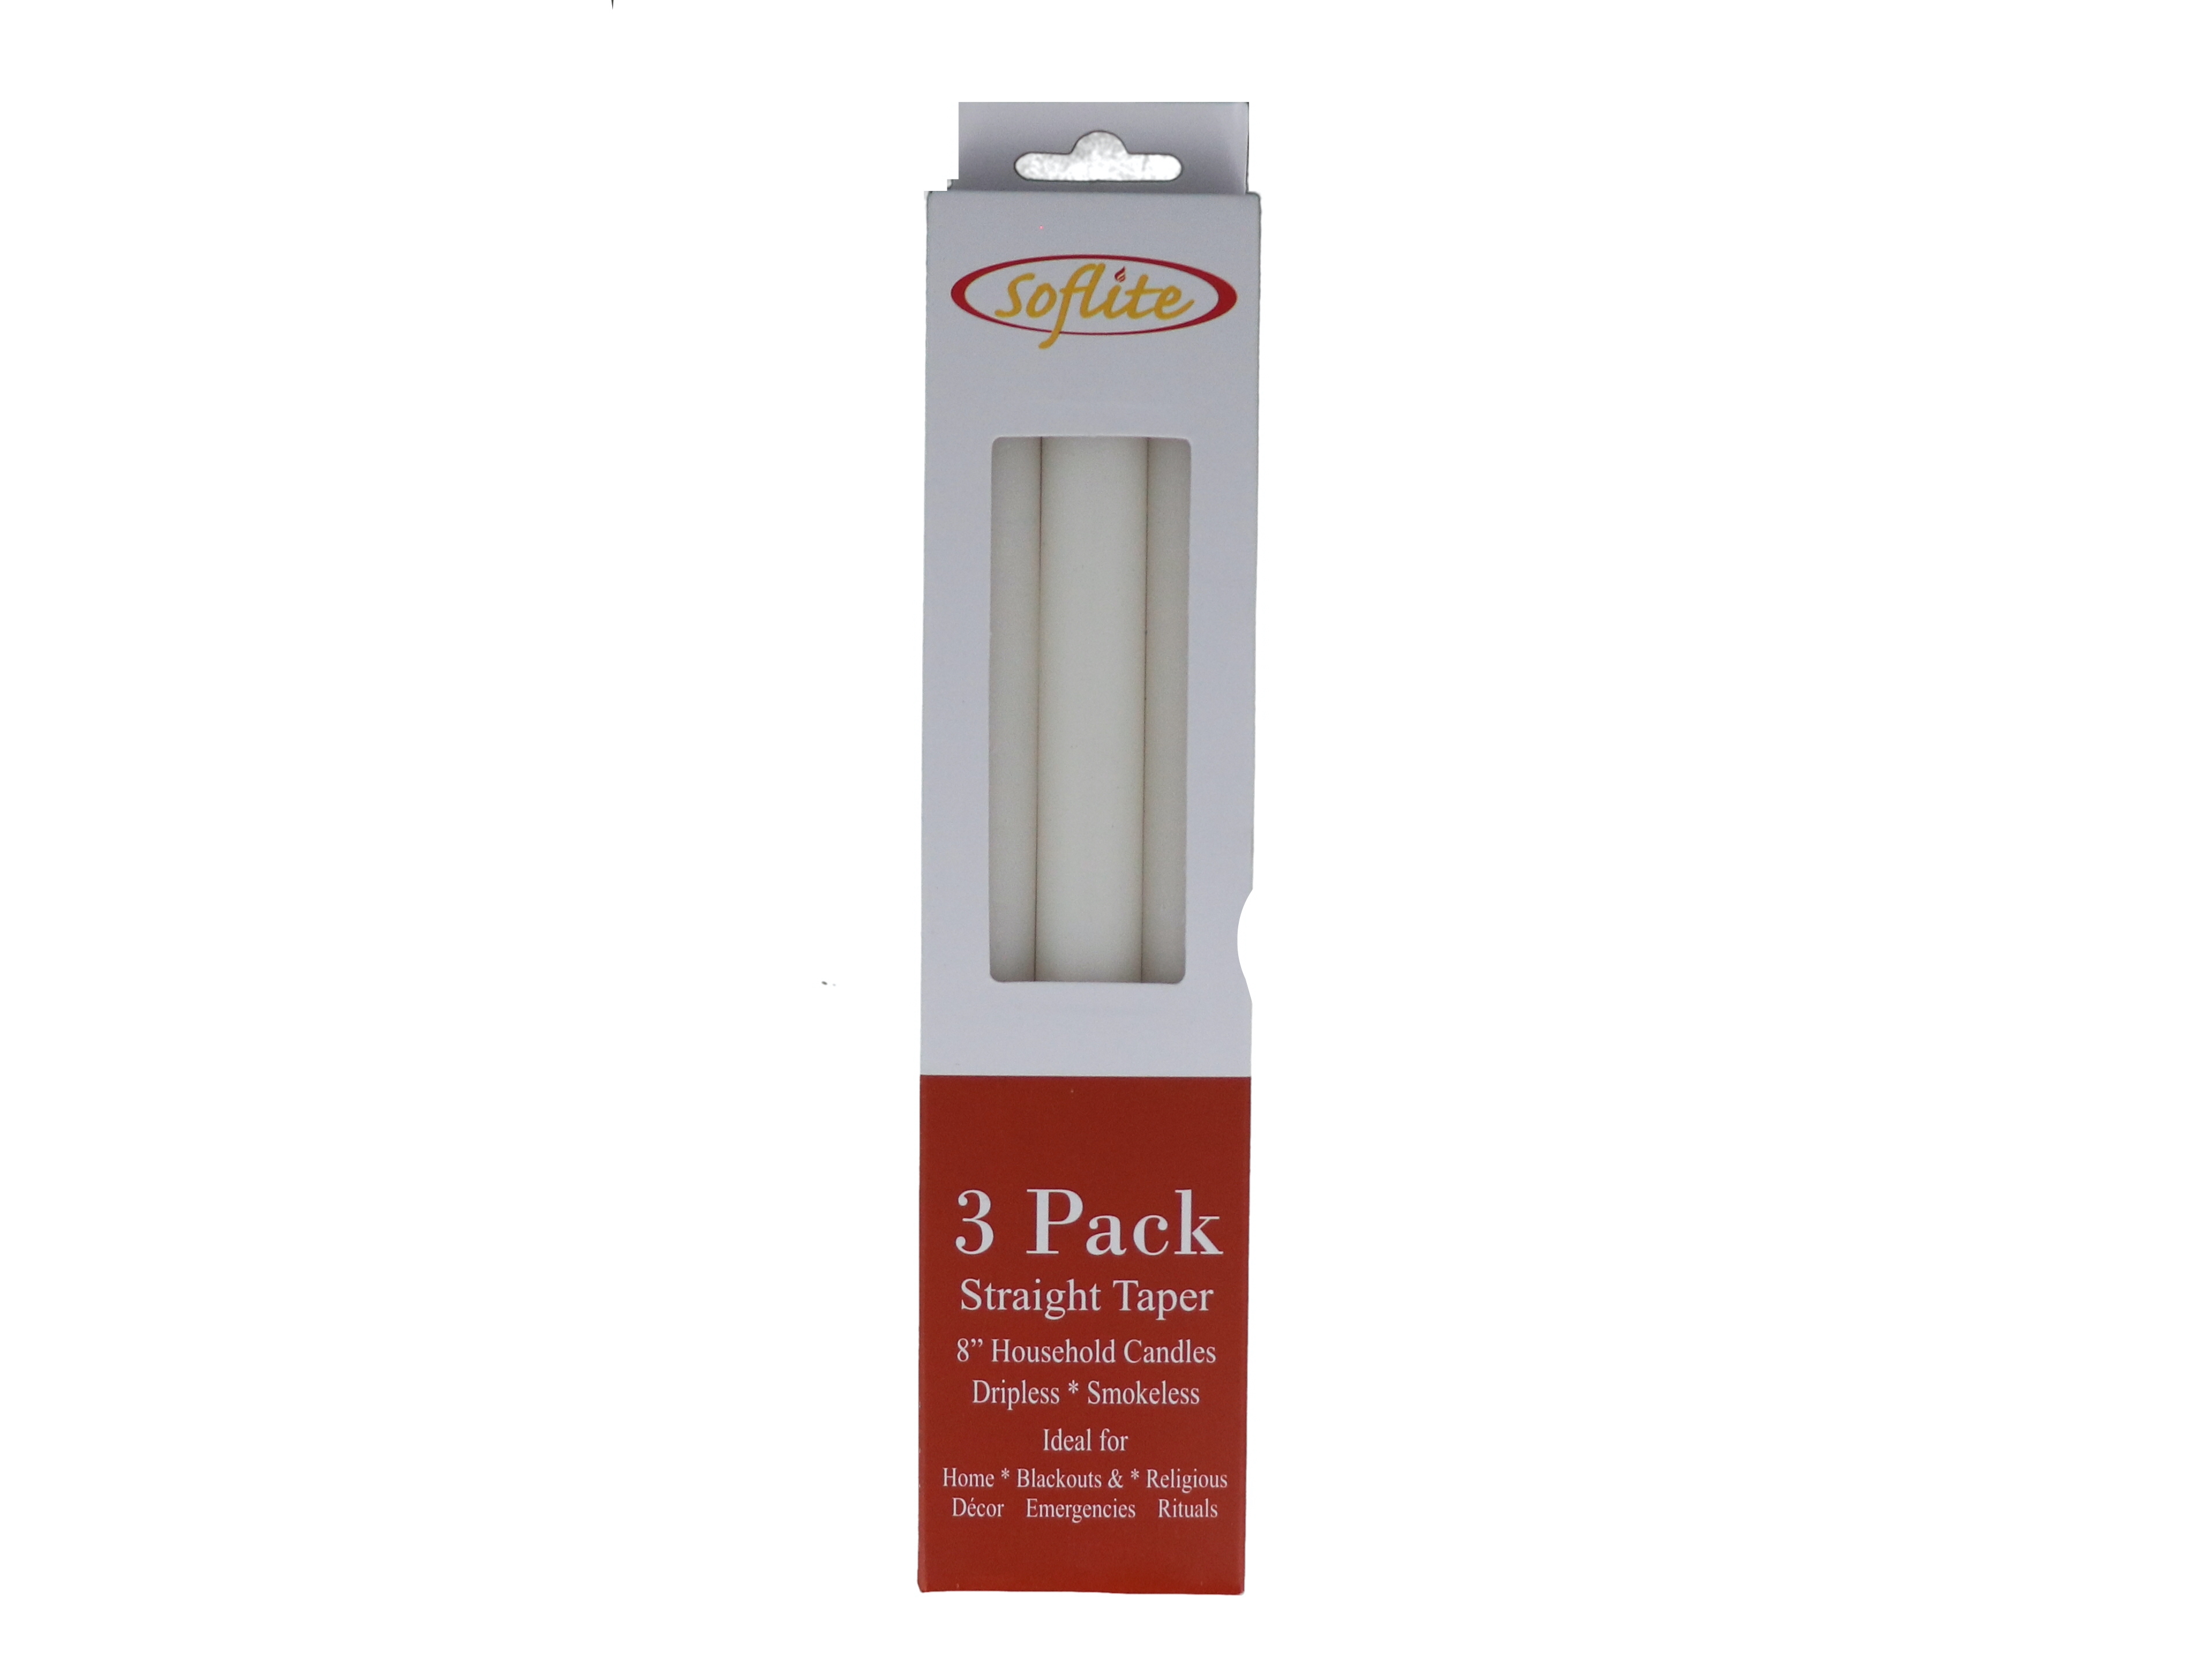 SOFLITE 3 PACK CANLE 8 INCH